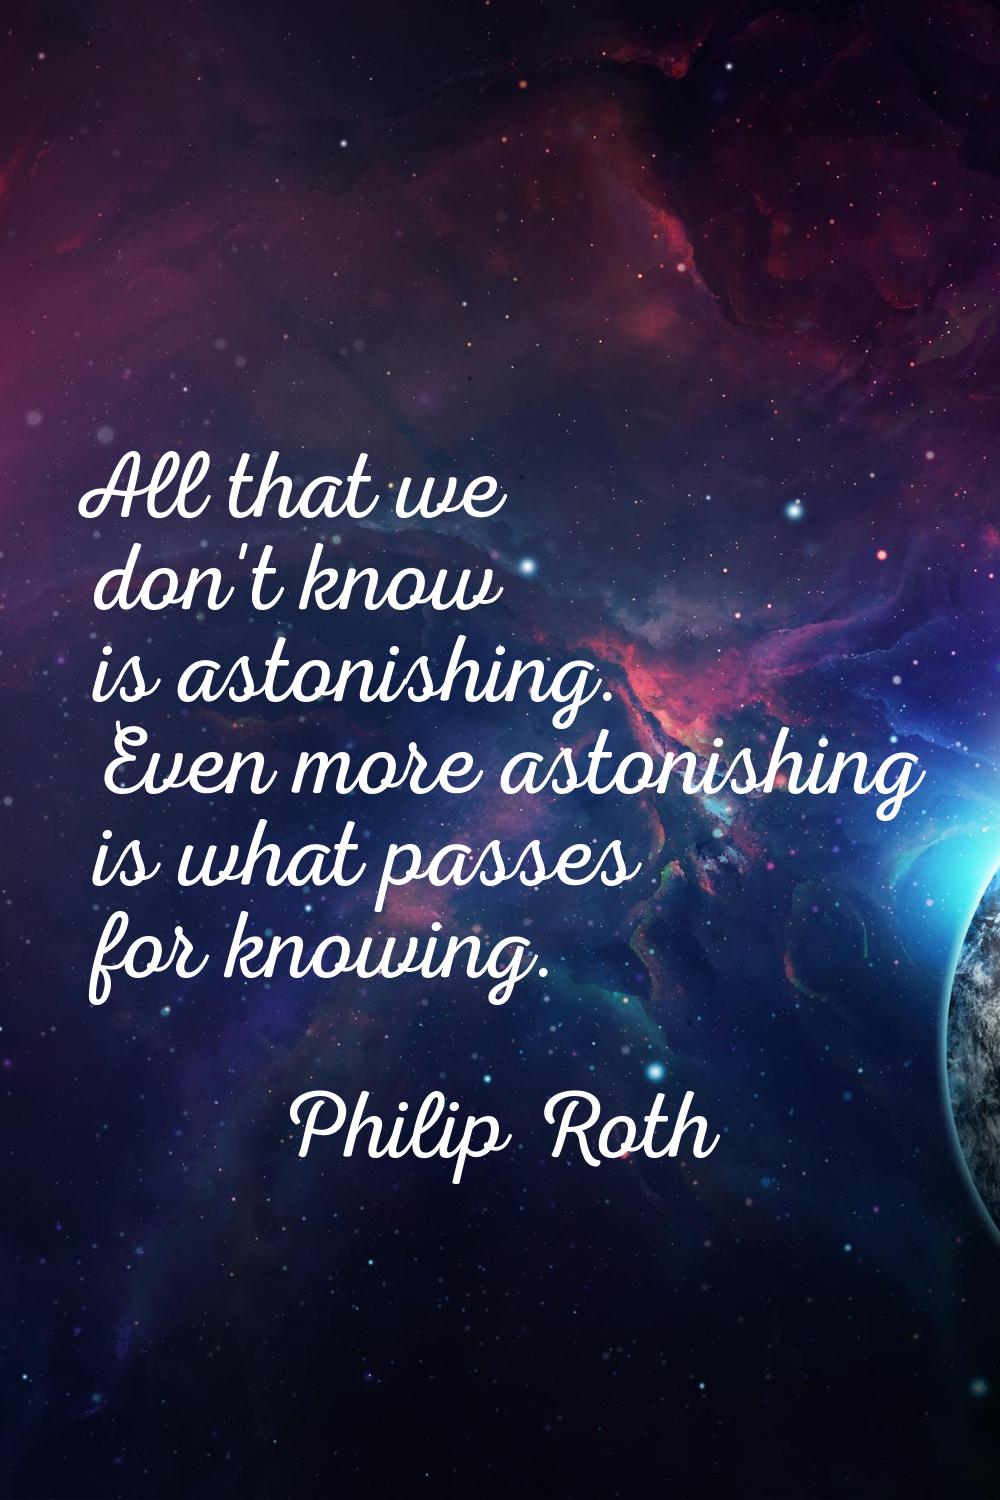 All that we don't know is astonishing. Even more astonishing is what passes for knowing.